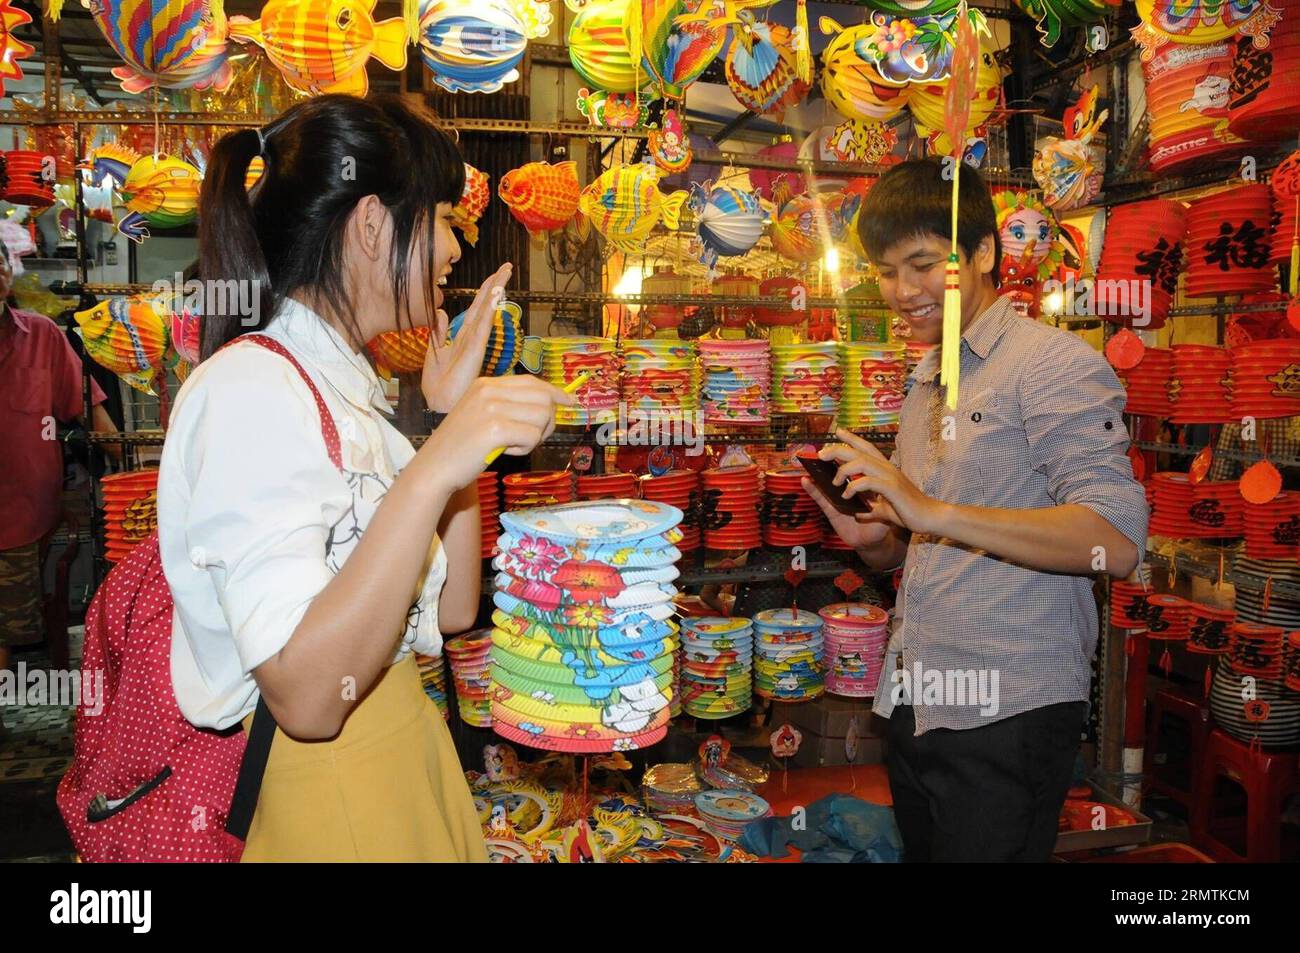 A girl poses for pictures during a visit to the Lantern Street in Ho Chi Minh City, on Sept. 8, 2014. The Mid-Autumn festival is one of the biggest celebrations of the year in Vietnam. ) VIETNAM-HO CHI MINH CITY-MID-AUTUMN FESTIVAL-LANTERN TaoxJun PUBLICATIONxNOTxINxCHN   a Girl Poses for Pictures during a Visit to The Lantern Street in Ho Chi Minh City ON Sept 8 2014 The Mid Autumn Festival IS One of The Biggest celebrations of The Year in Vietnam Vietnam Ho Chi Minh City Mid Autumn Festival Lantern  PUBLICATIONxNOTxINxCHN Stock Photo